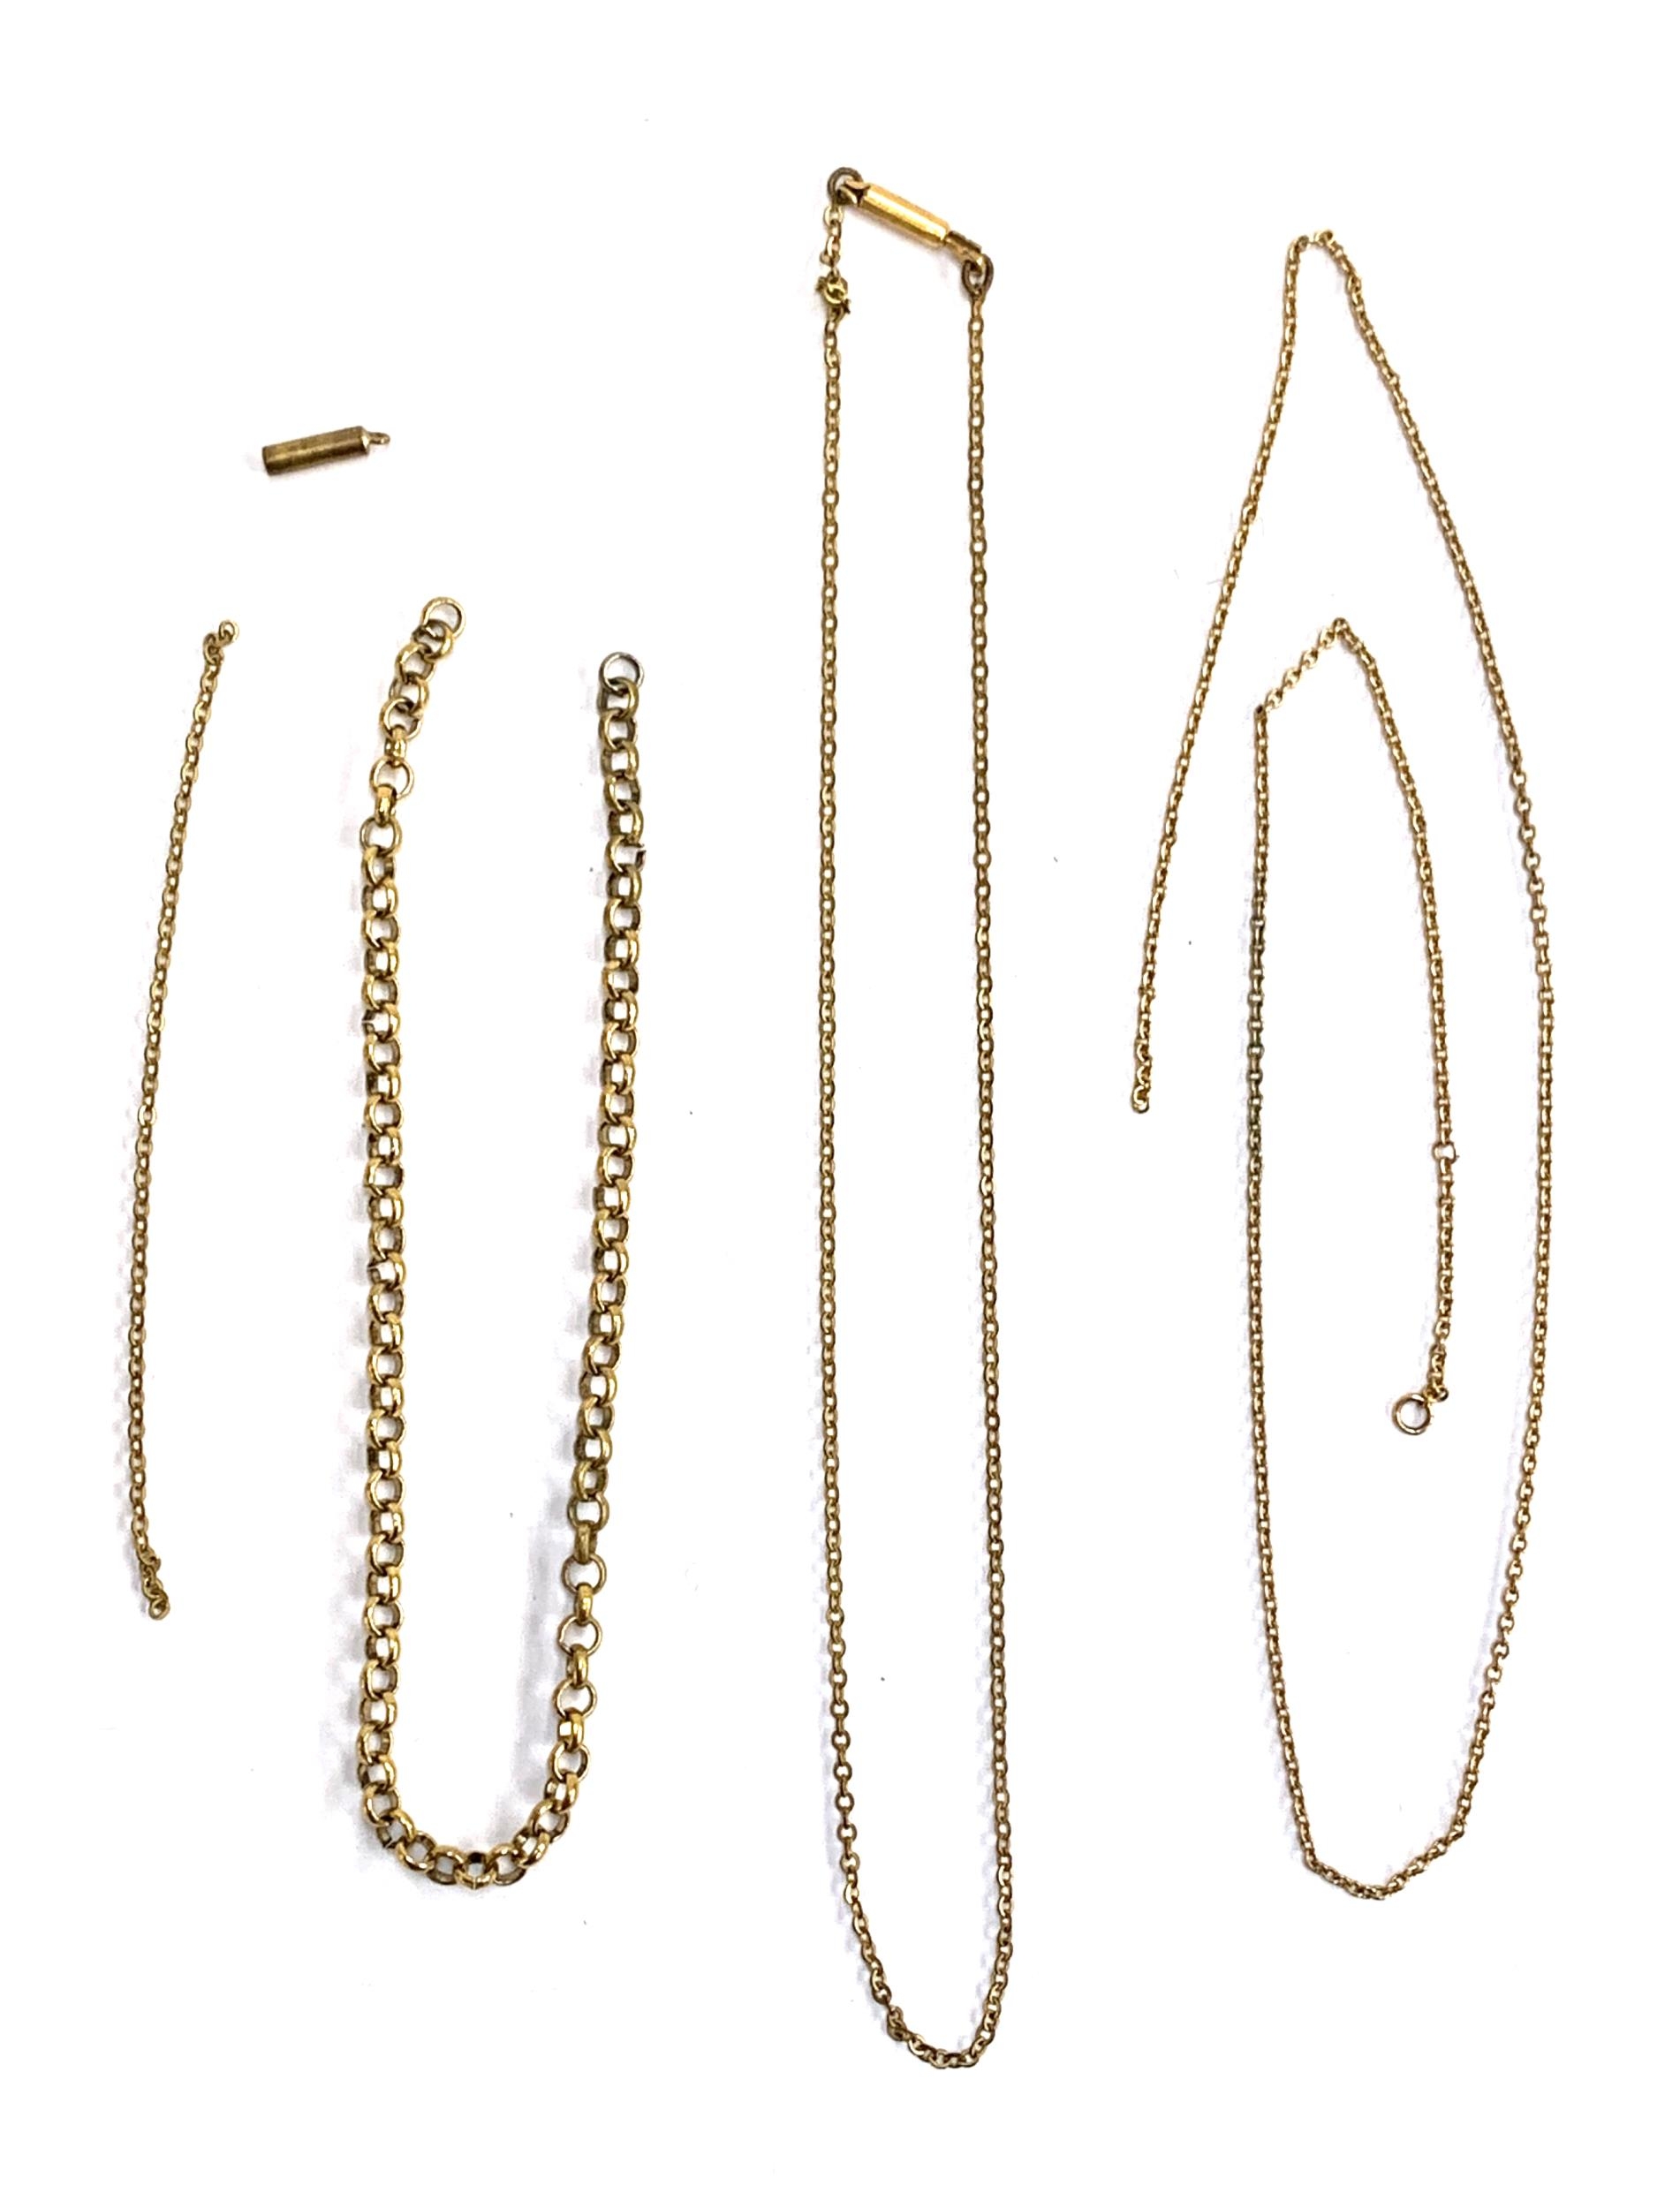 A yellow metal chain (no clasp), 1.4g; together with rolled gold and metal chains (af)